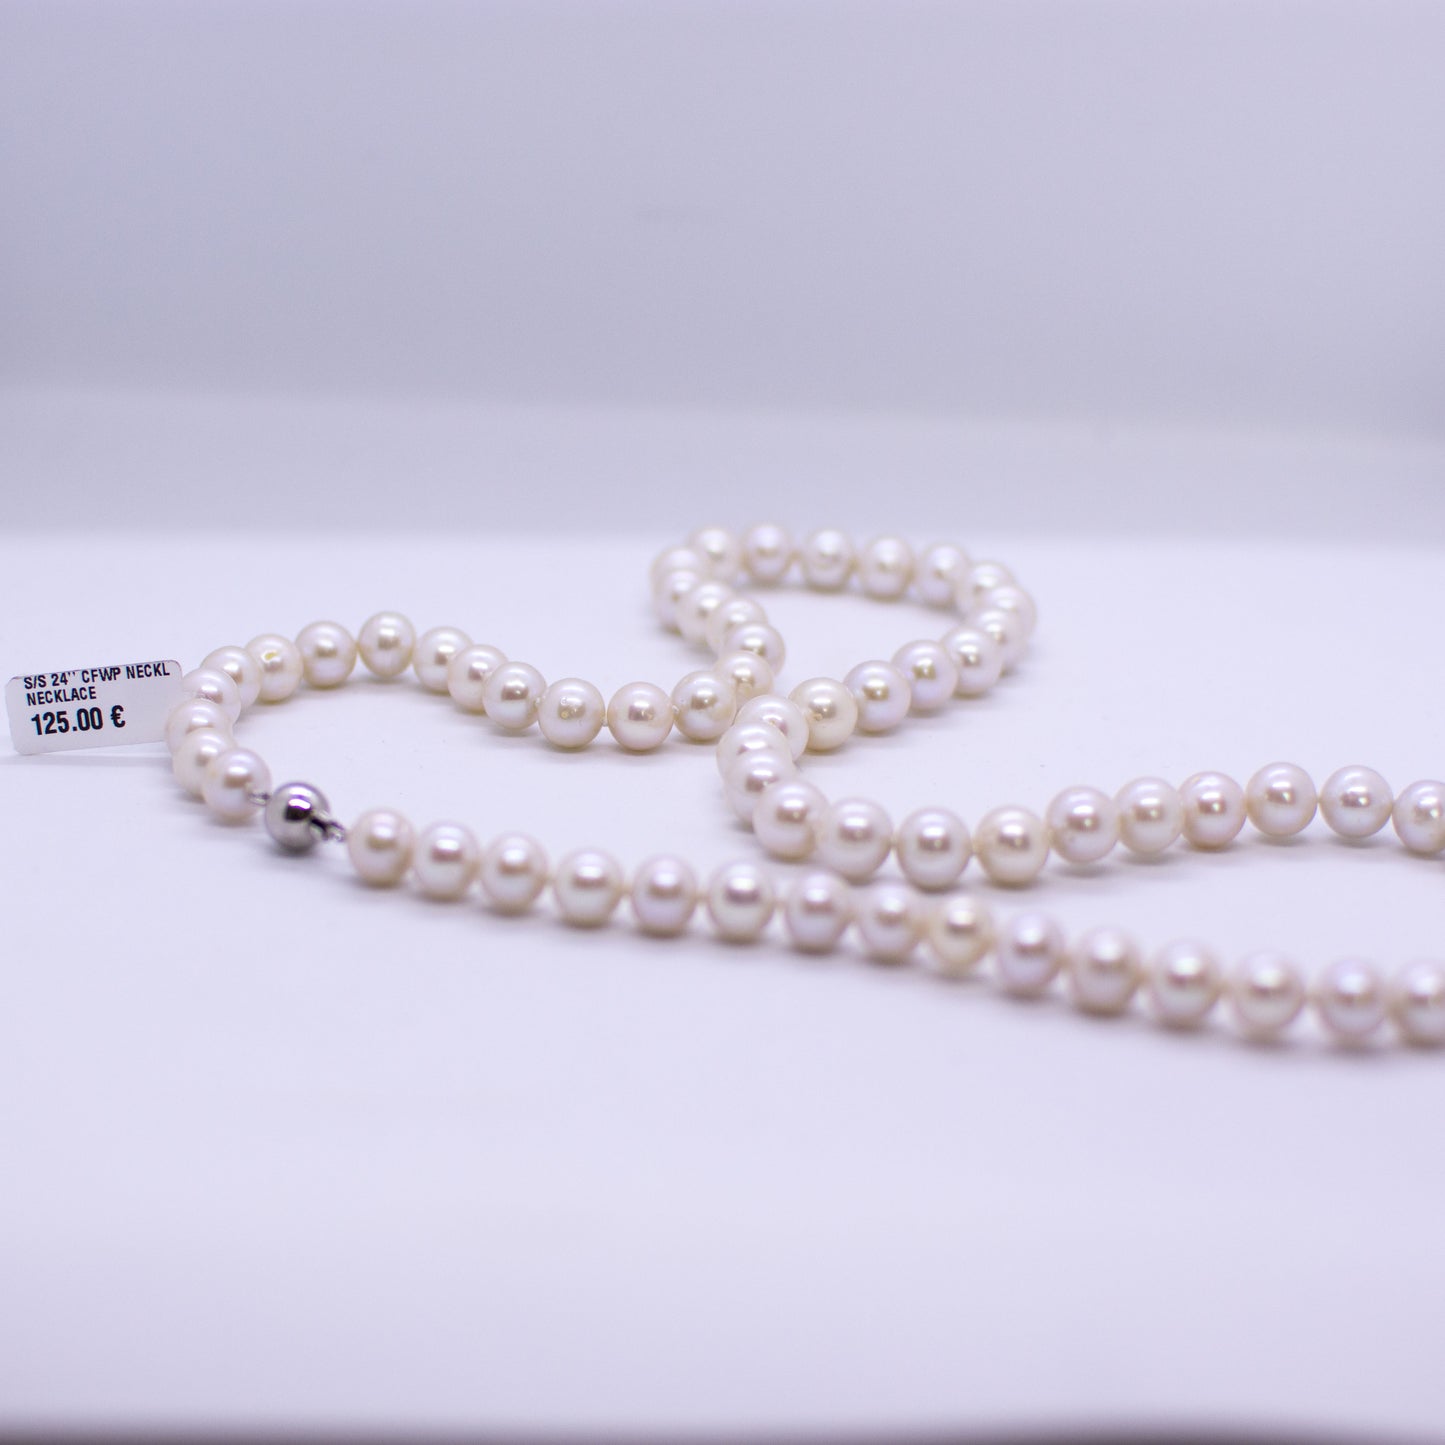 Cultured Freshwater Pearl Necklace - 8-9mm|24" - John Ross Jewellers